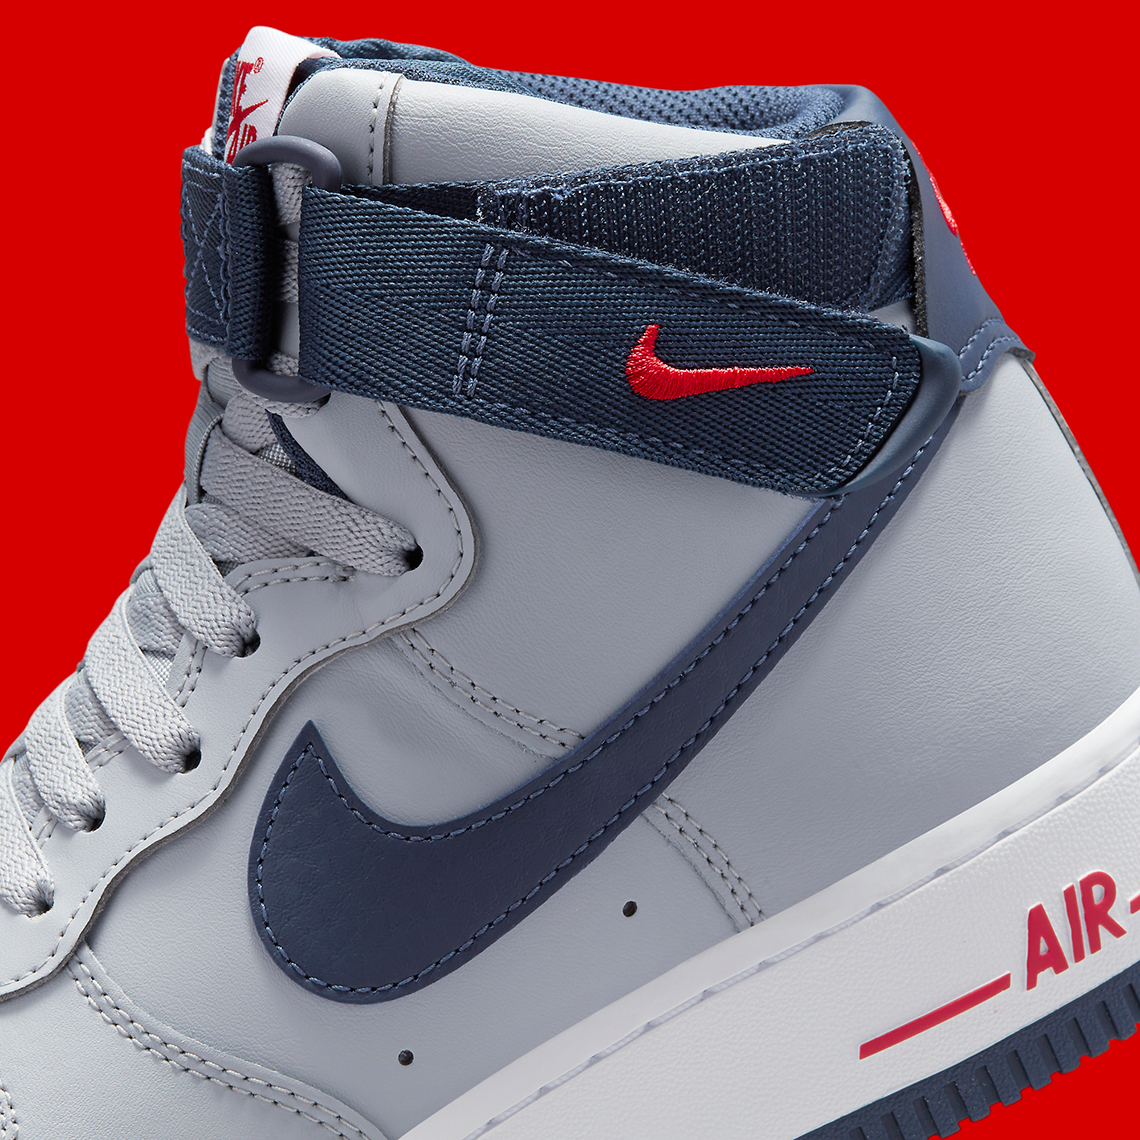 Nike Air Force 1 High Grey Navy Red Dz7338 001 1